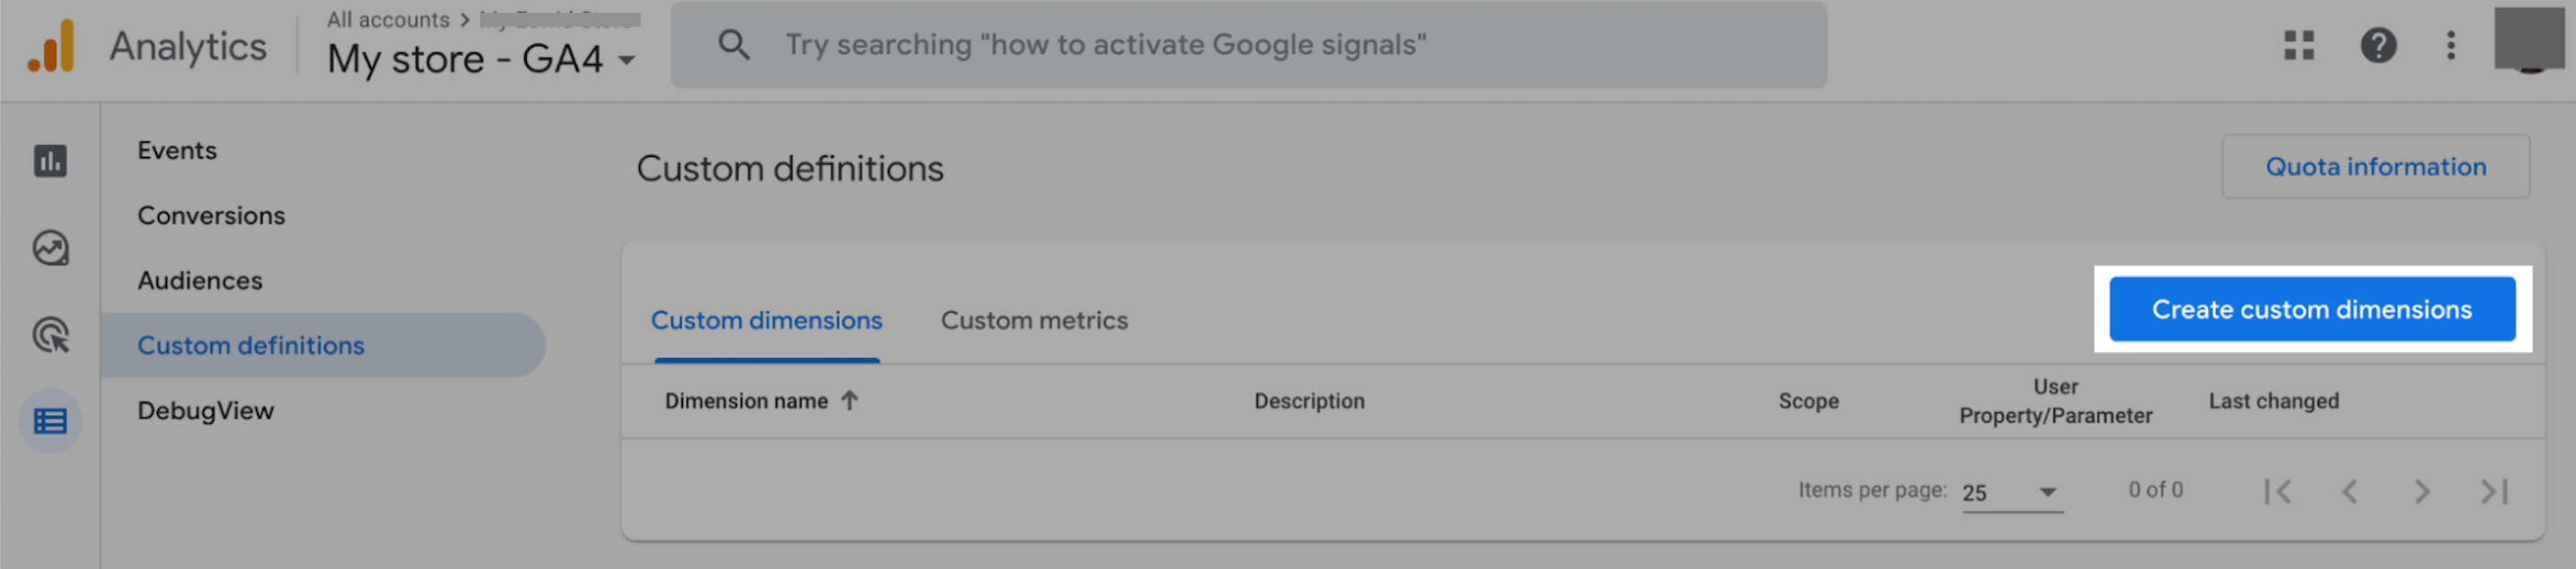 Getting_reports_using_Google_Analytics_4__15_.png